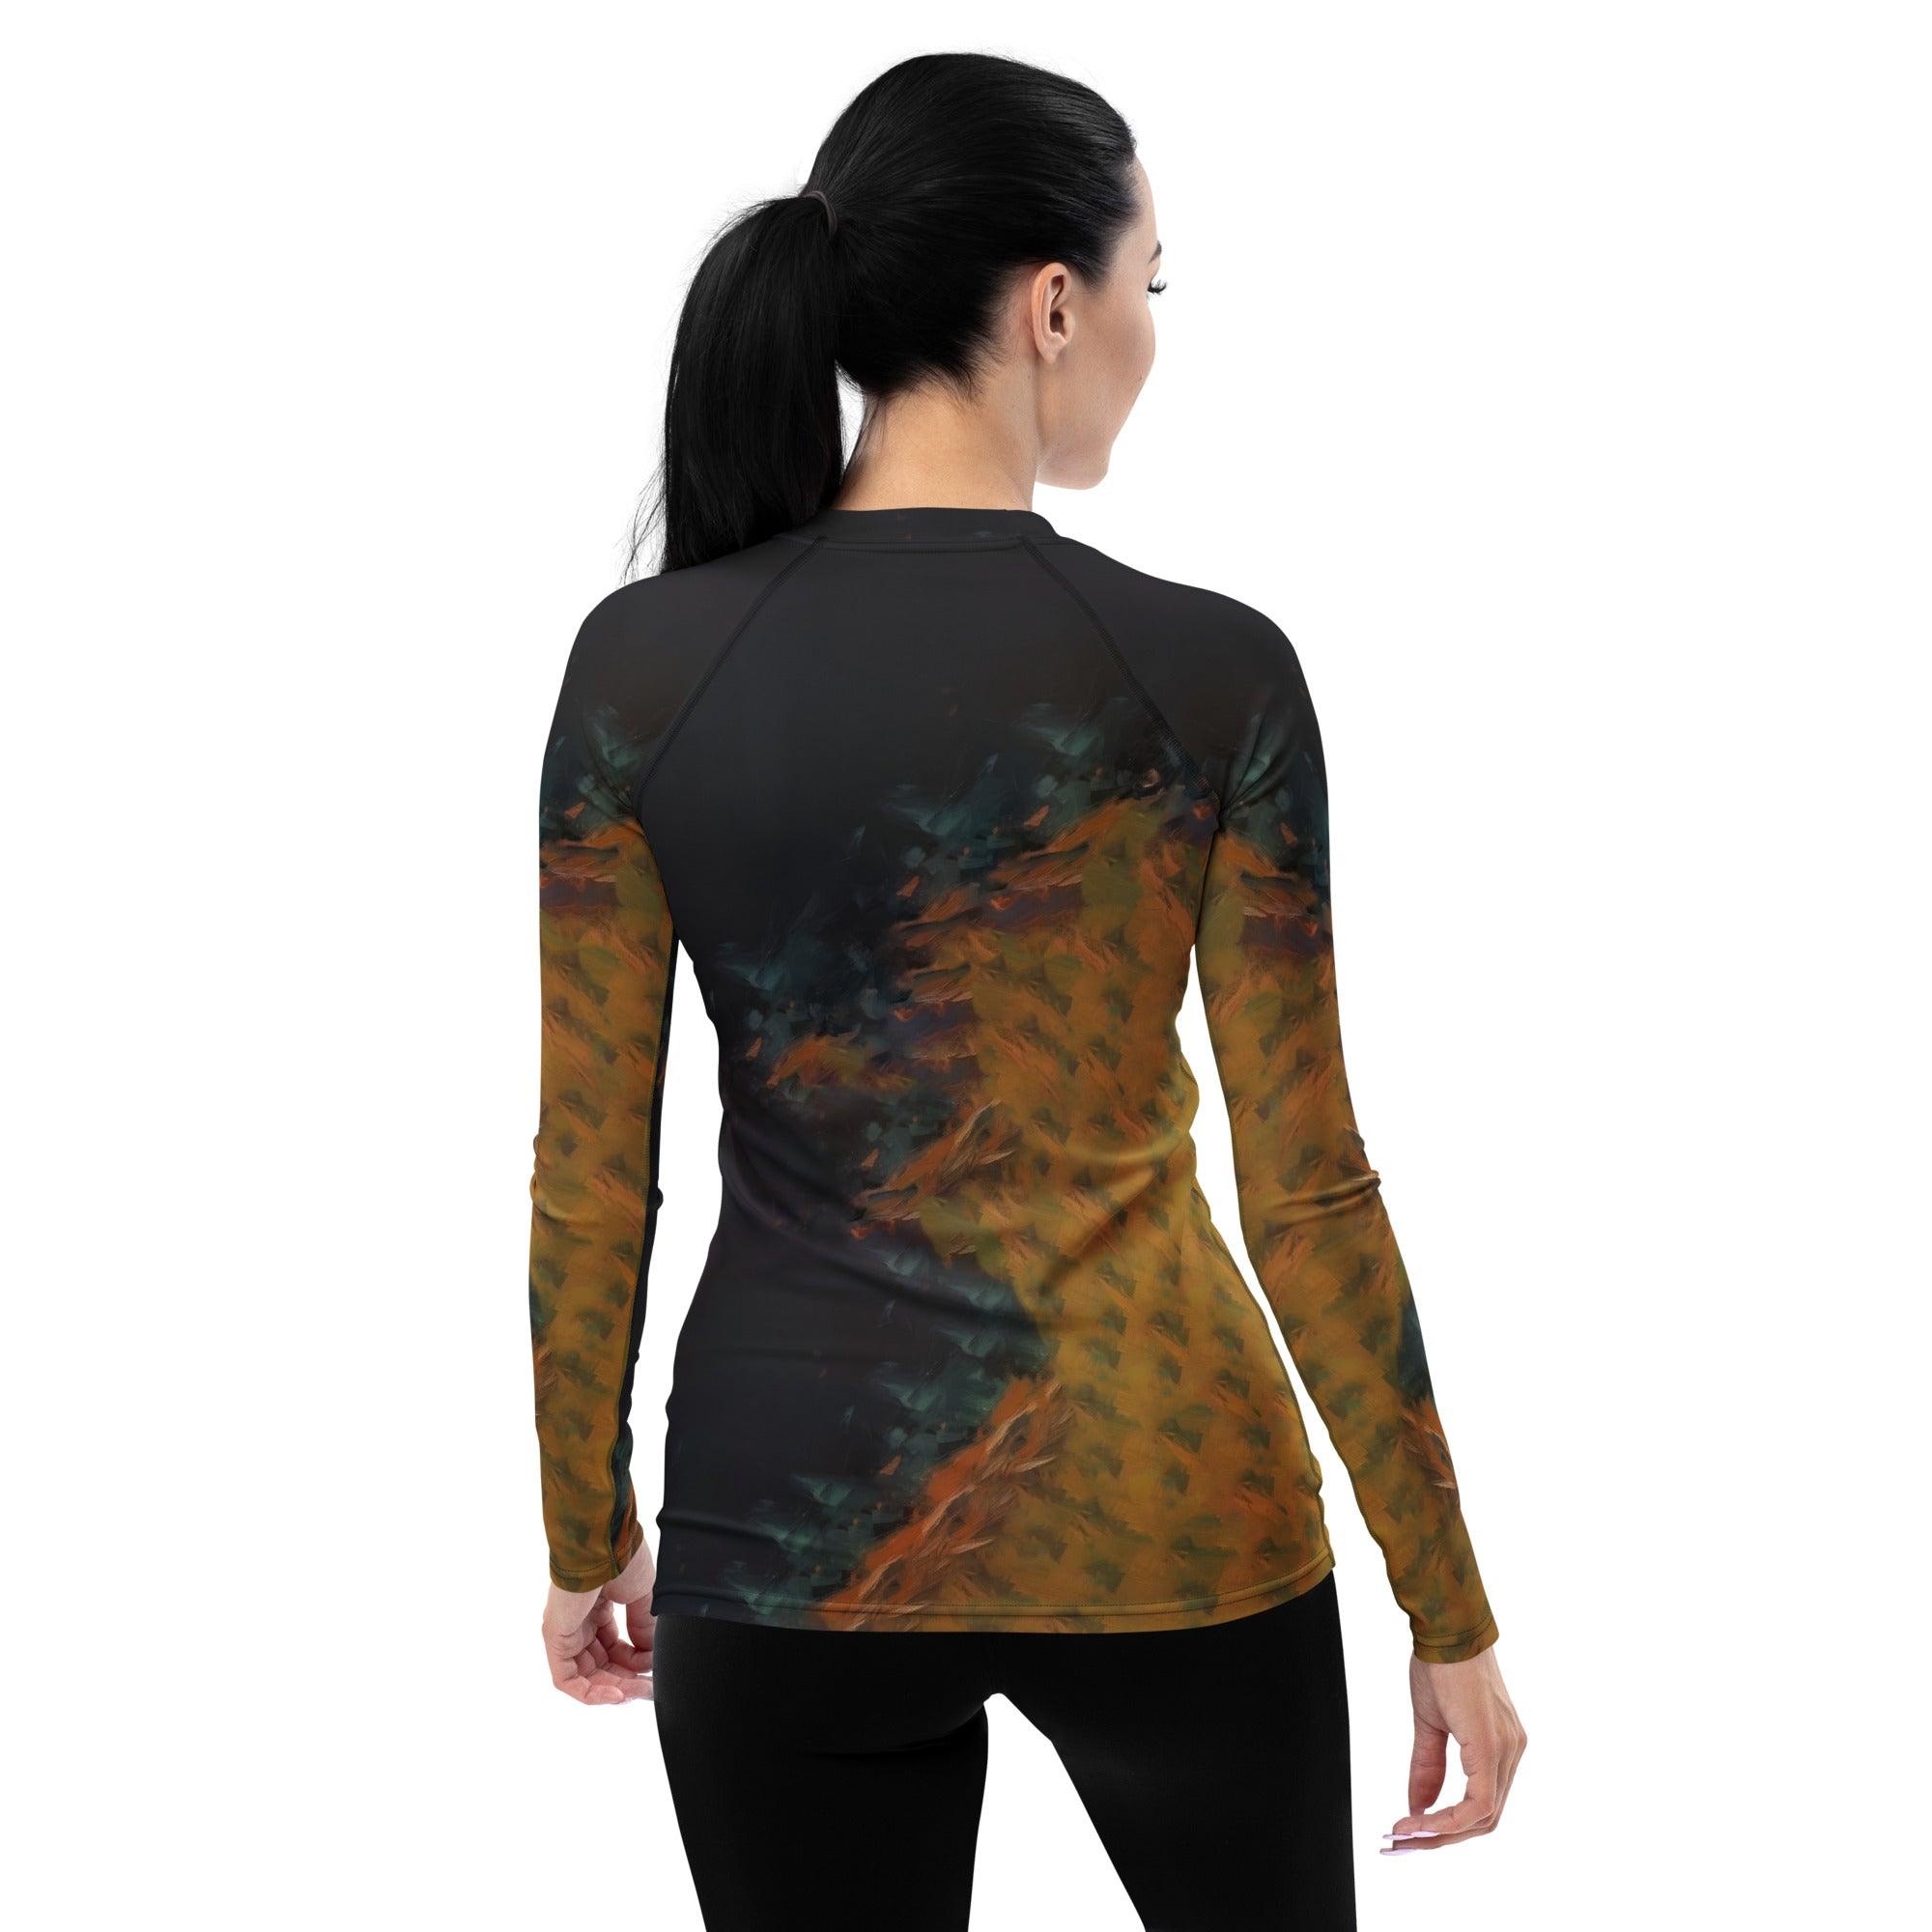 Durable Rash Guard for Women in Action